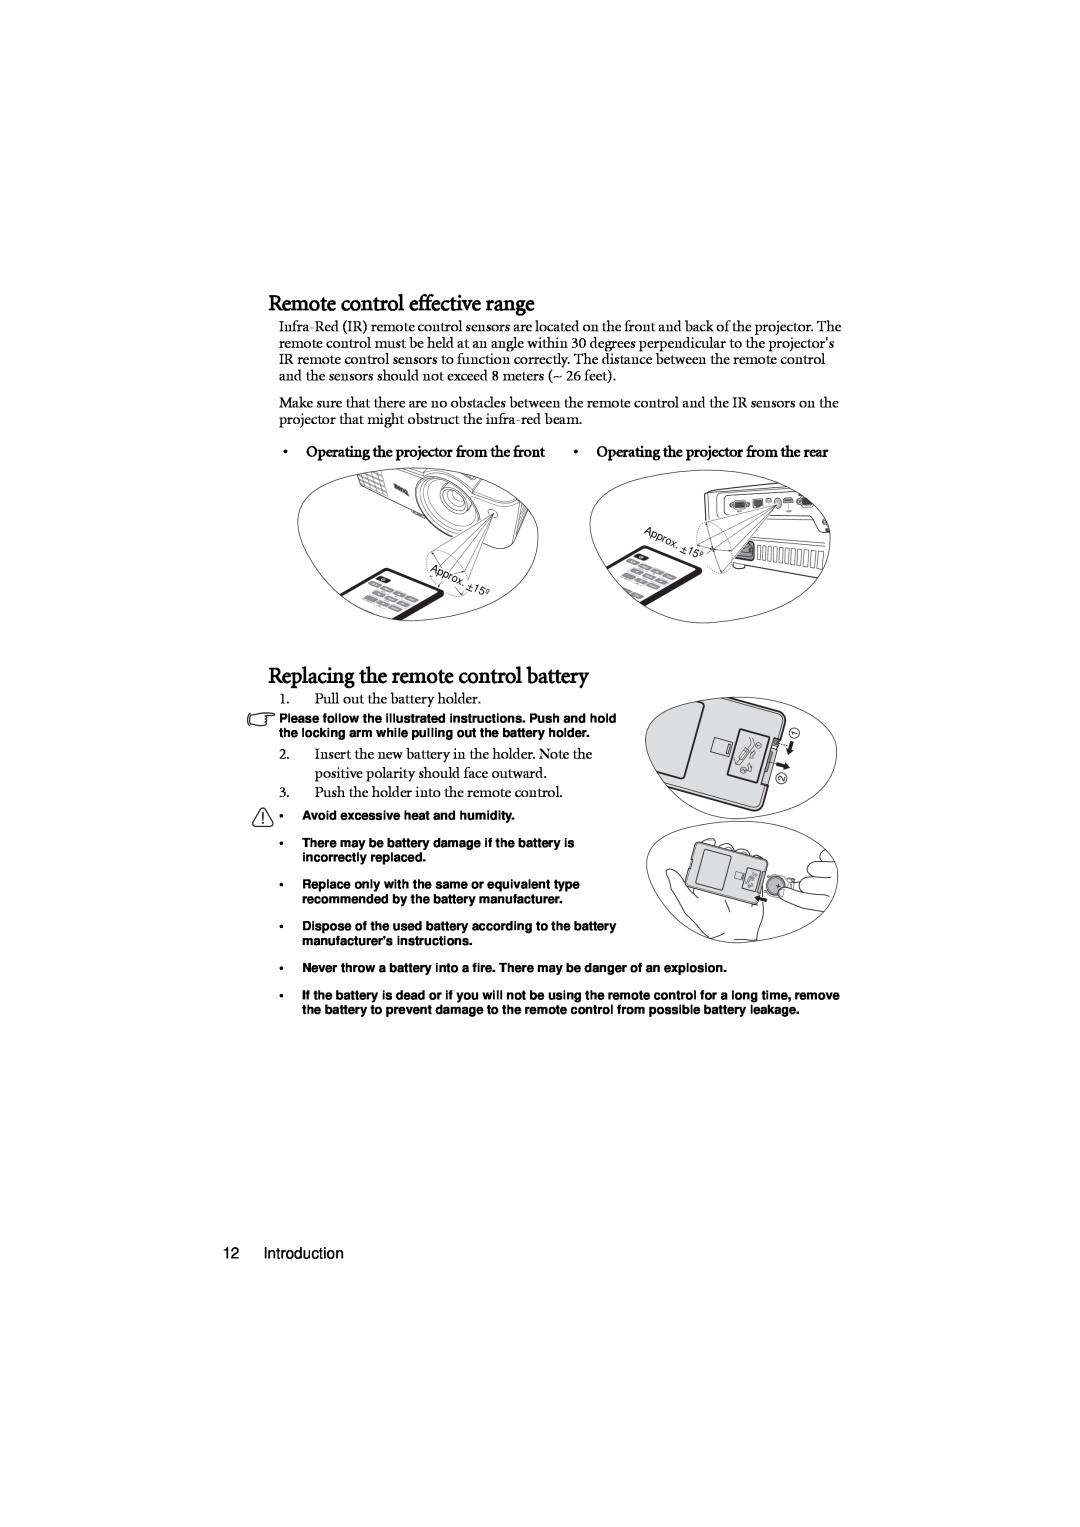 BenQ MX701 user manual Remote control effective range, Replacing the remote control battery 